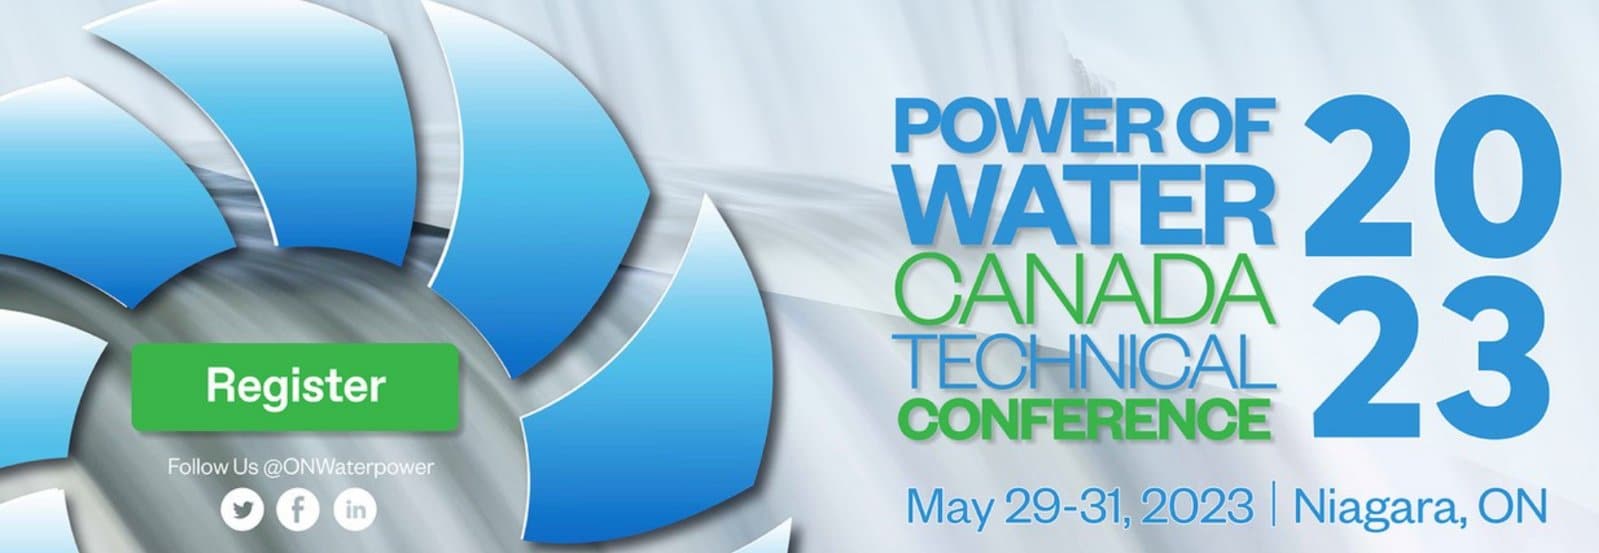 Power Of Water May 29-31, 2023 Event Image